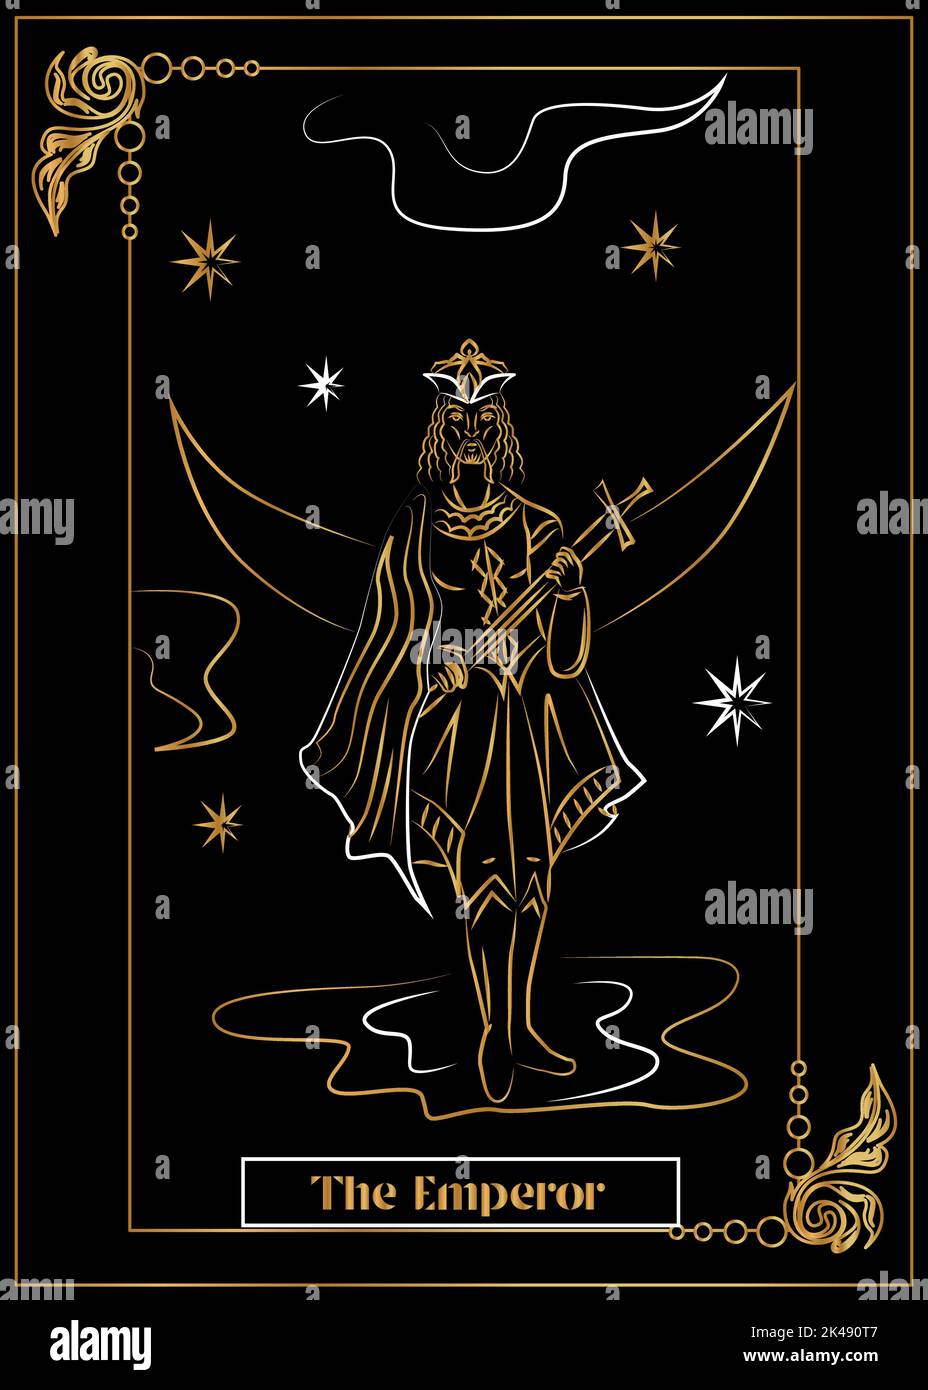 the illustration - card for tarot - The Emperor. Stock Vector